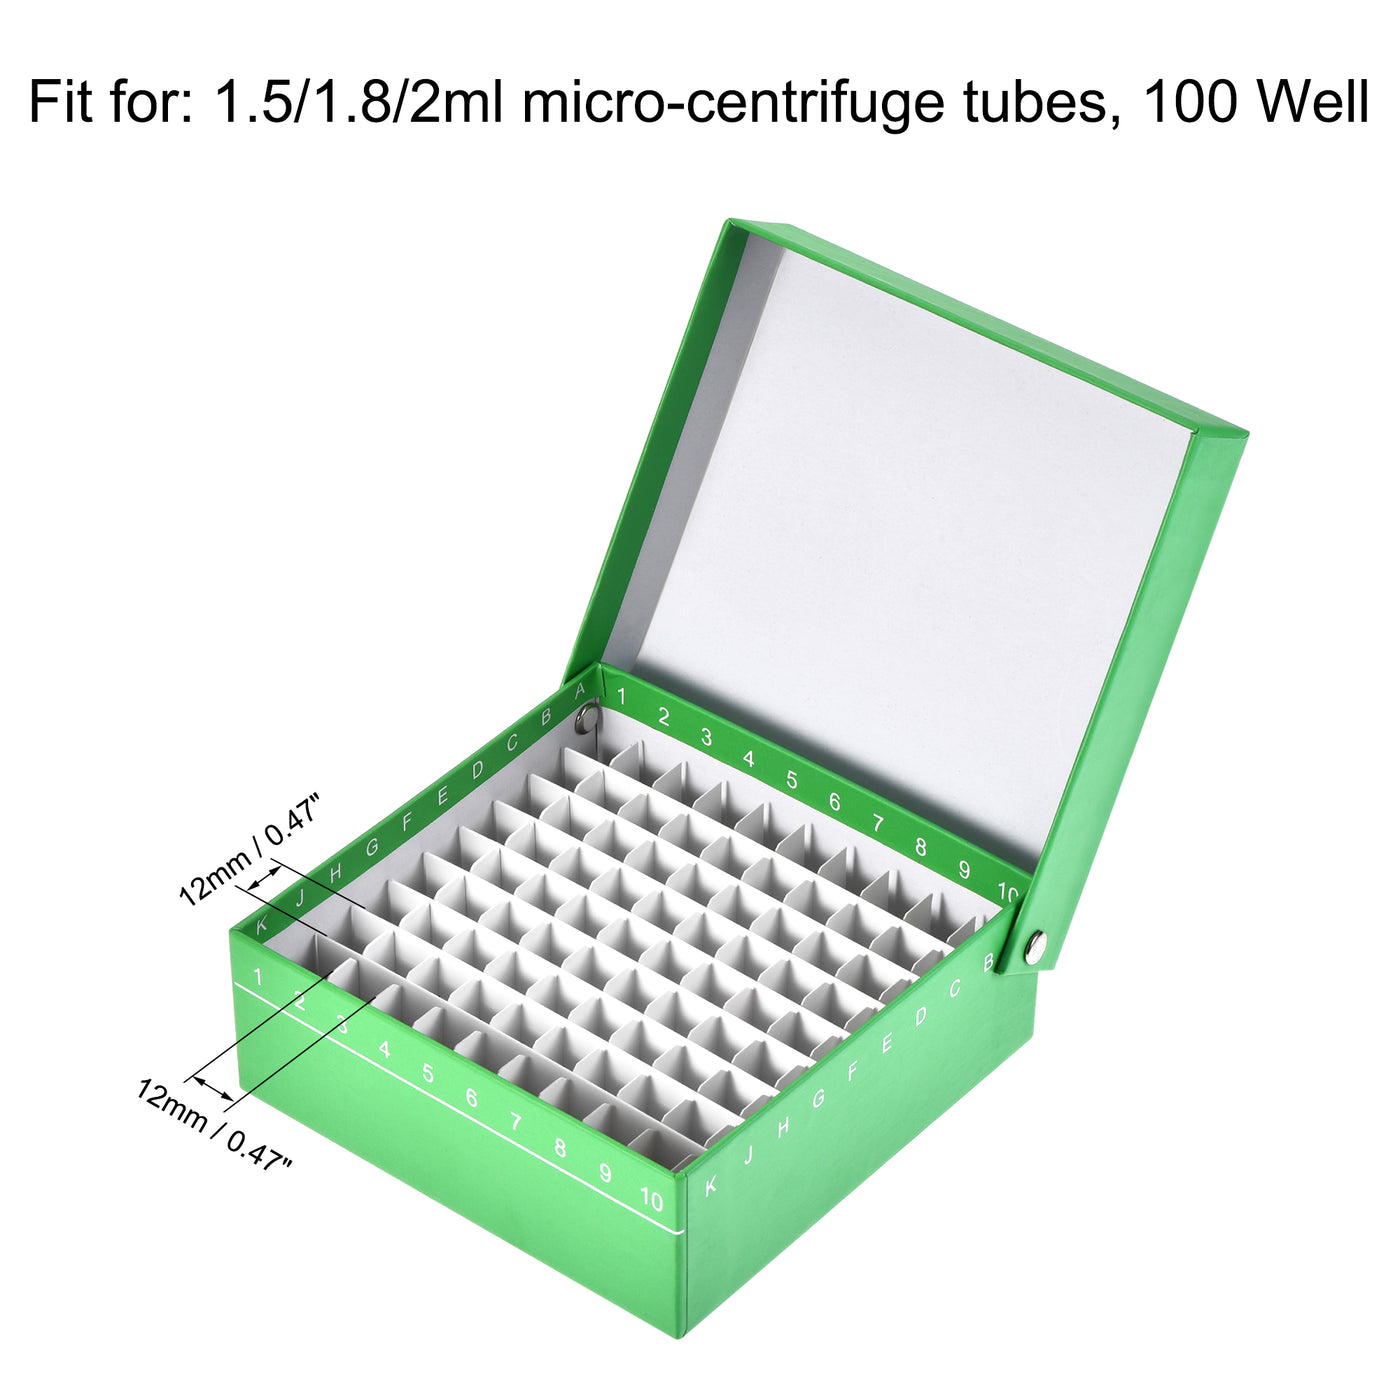 uxcell Uxcell Centrifuge Tube Green 100-Well Waterproof Cardboard Holder for 1.5/1.8/2ml Tubes